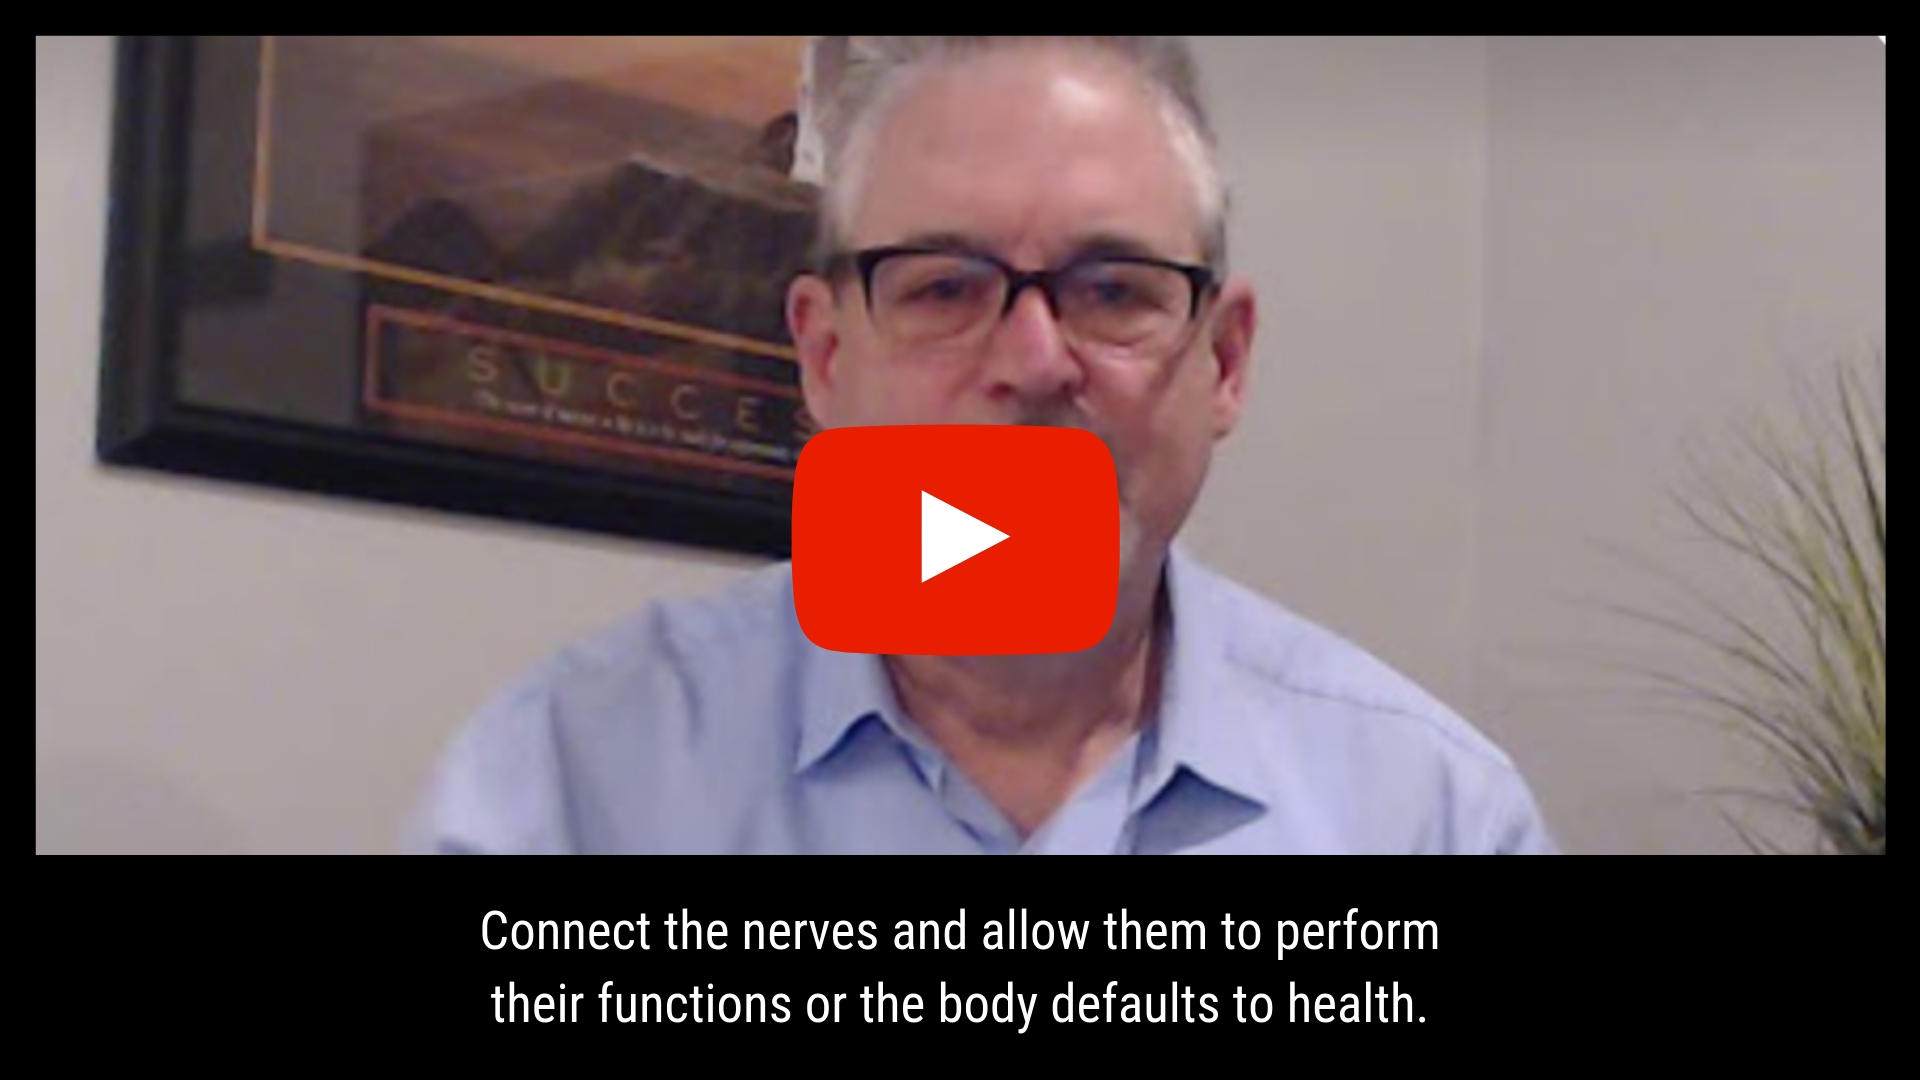 Connect the nerves and allow them to perform their functions or the body defaults to health.